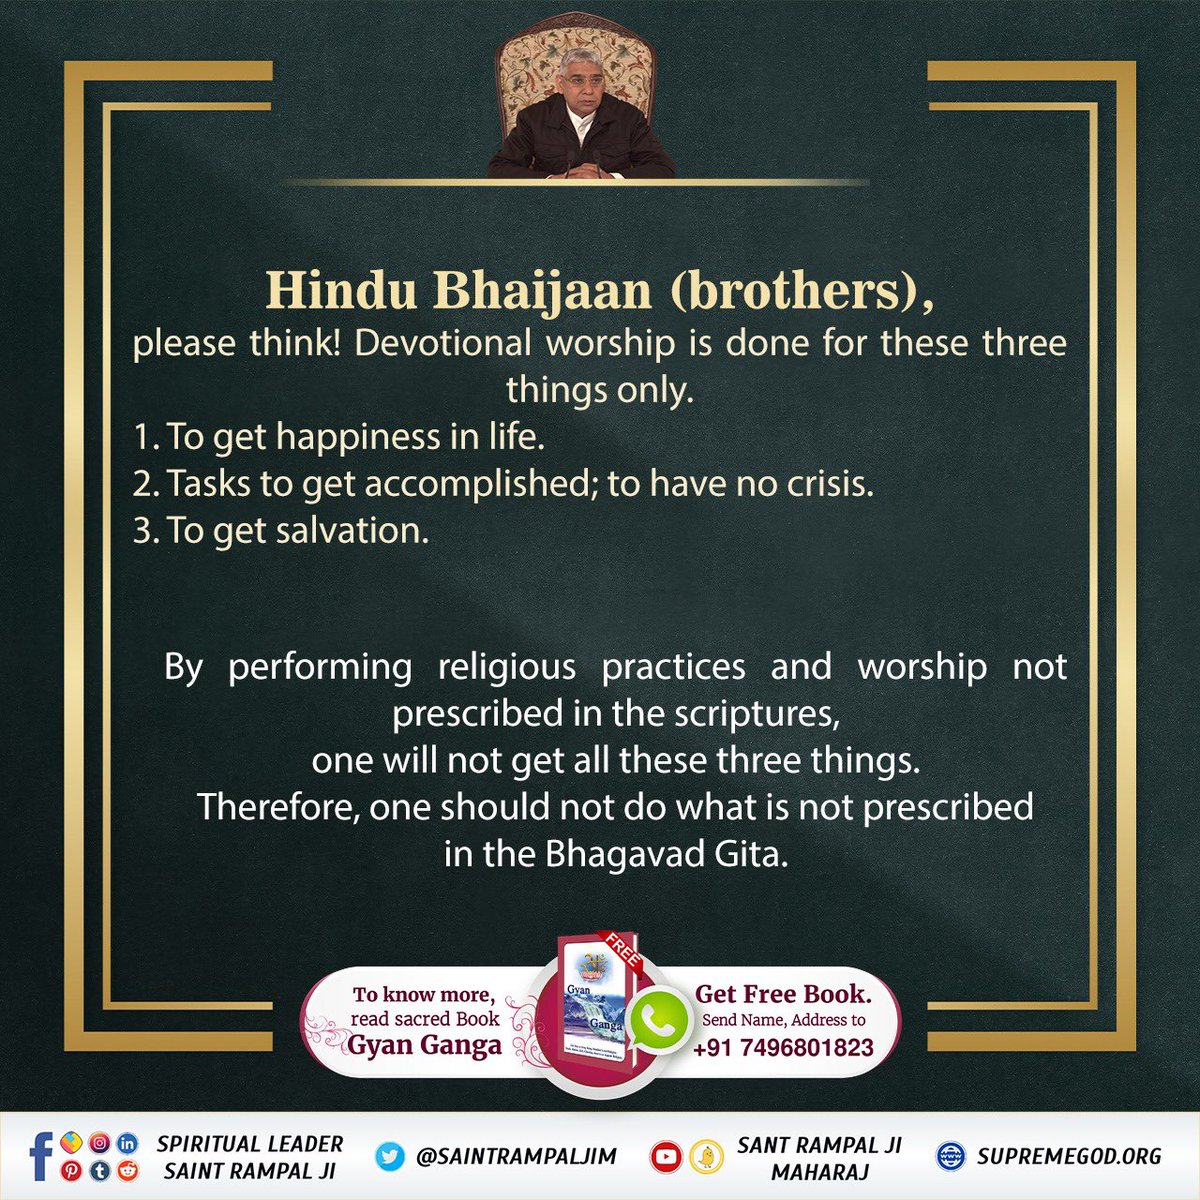 #GodMorningSatursday
Hindu Bhaijaan (brothers),

please think! Devotional worship is done for these three things only.
1. To get happiness in life.
2. Tasks to get accomplished; to have no crisis.
3. To get salvation.
⤵️⤵️⤵️